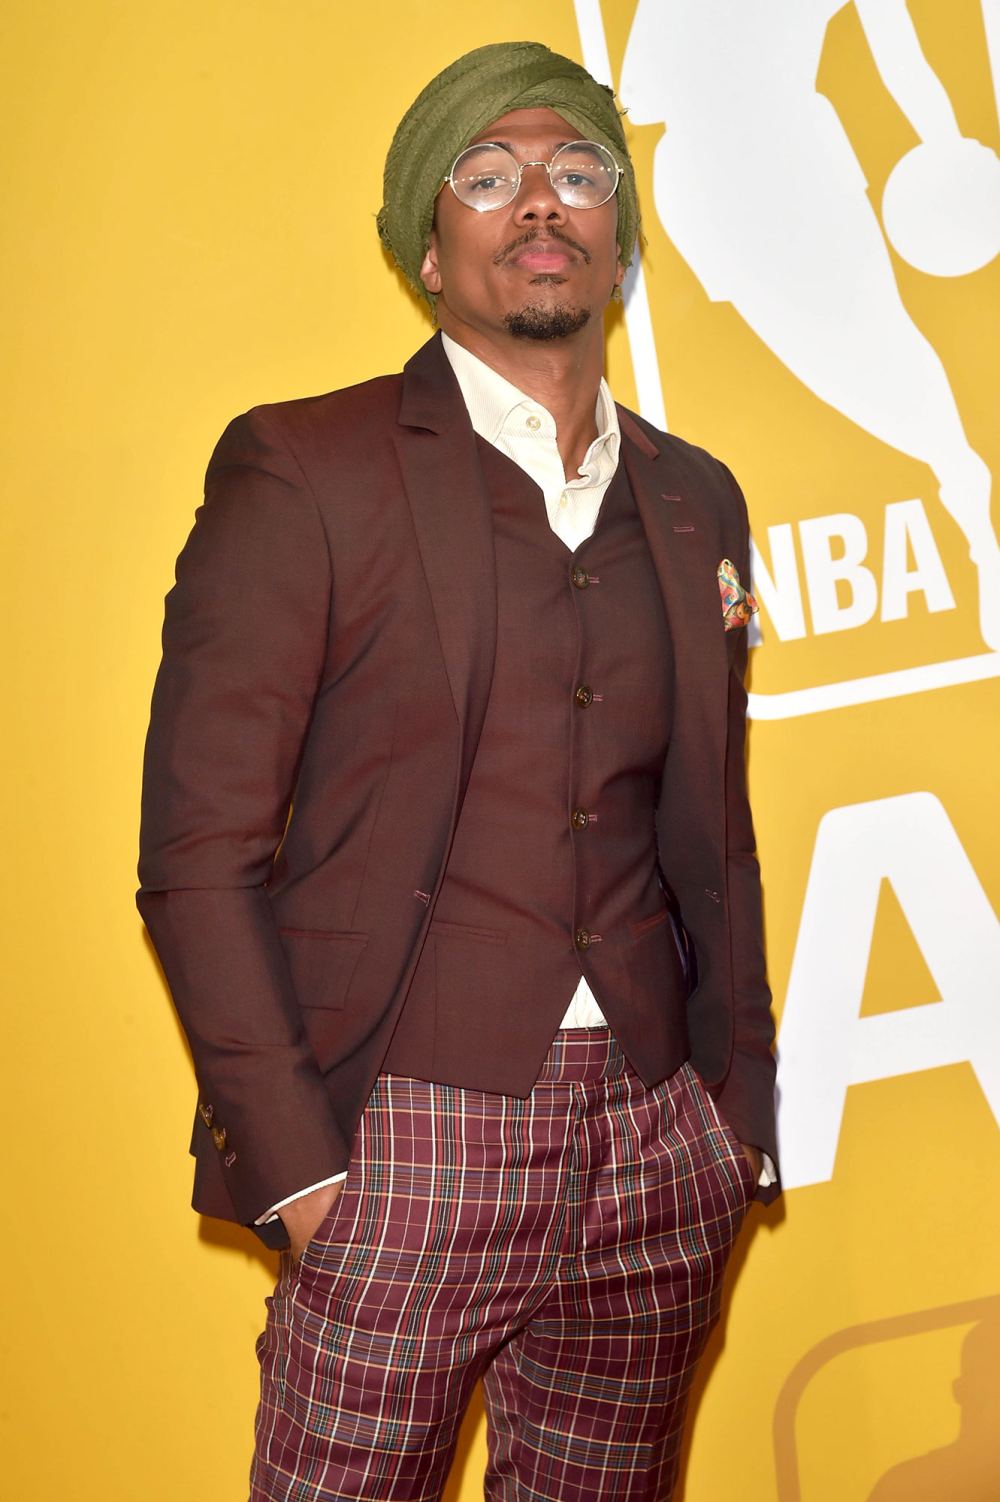 Nick Cannon Talk Show Not Premiere in 2020 After Anti-Semitic Remarks Scandal